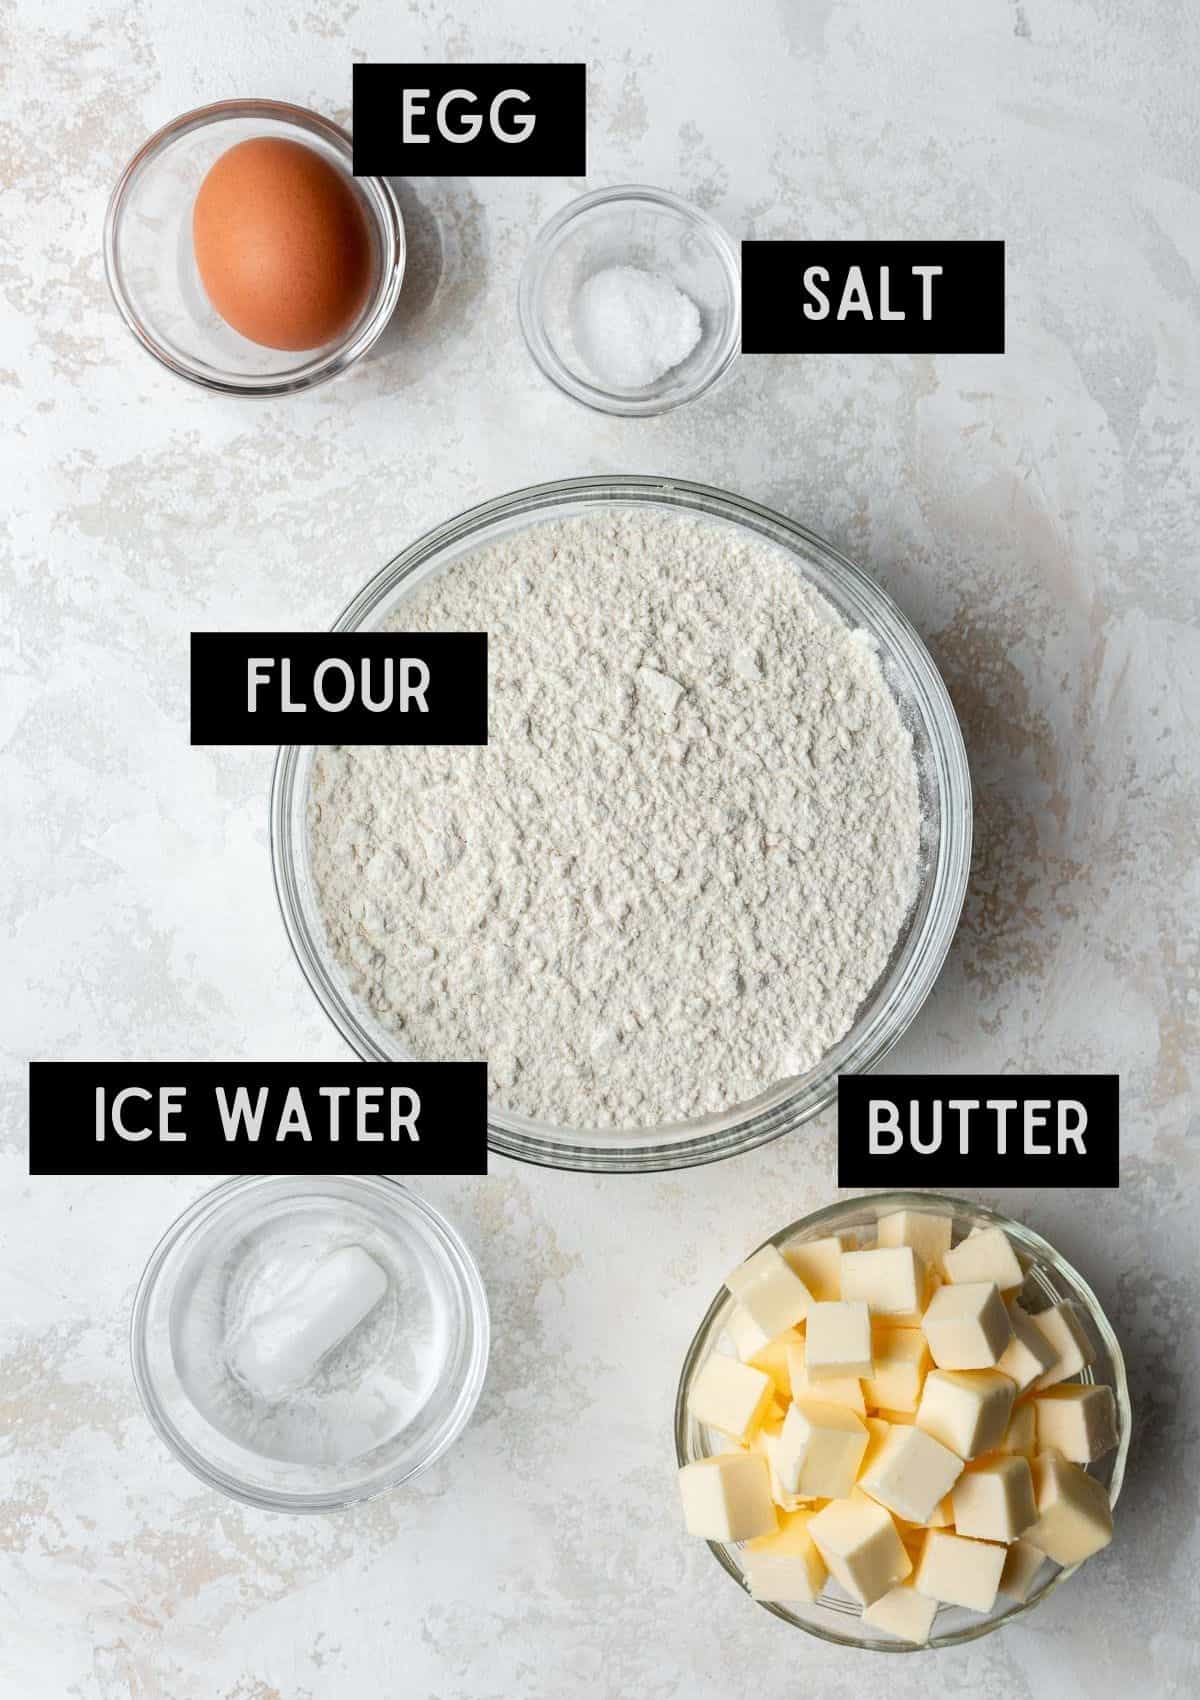 Labelled ingredients for a flakey quiche crust (see recipe for details).